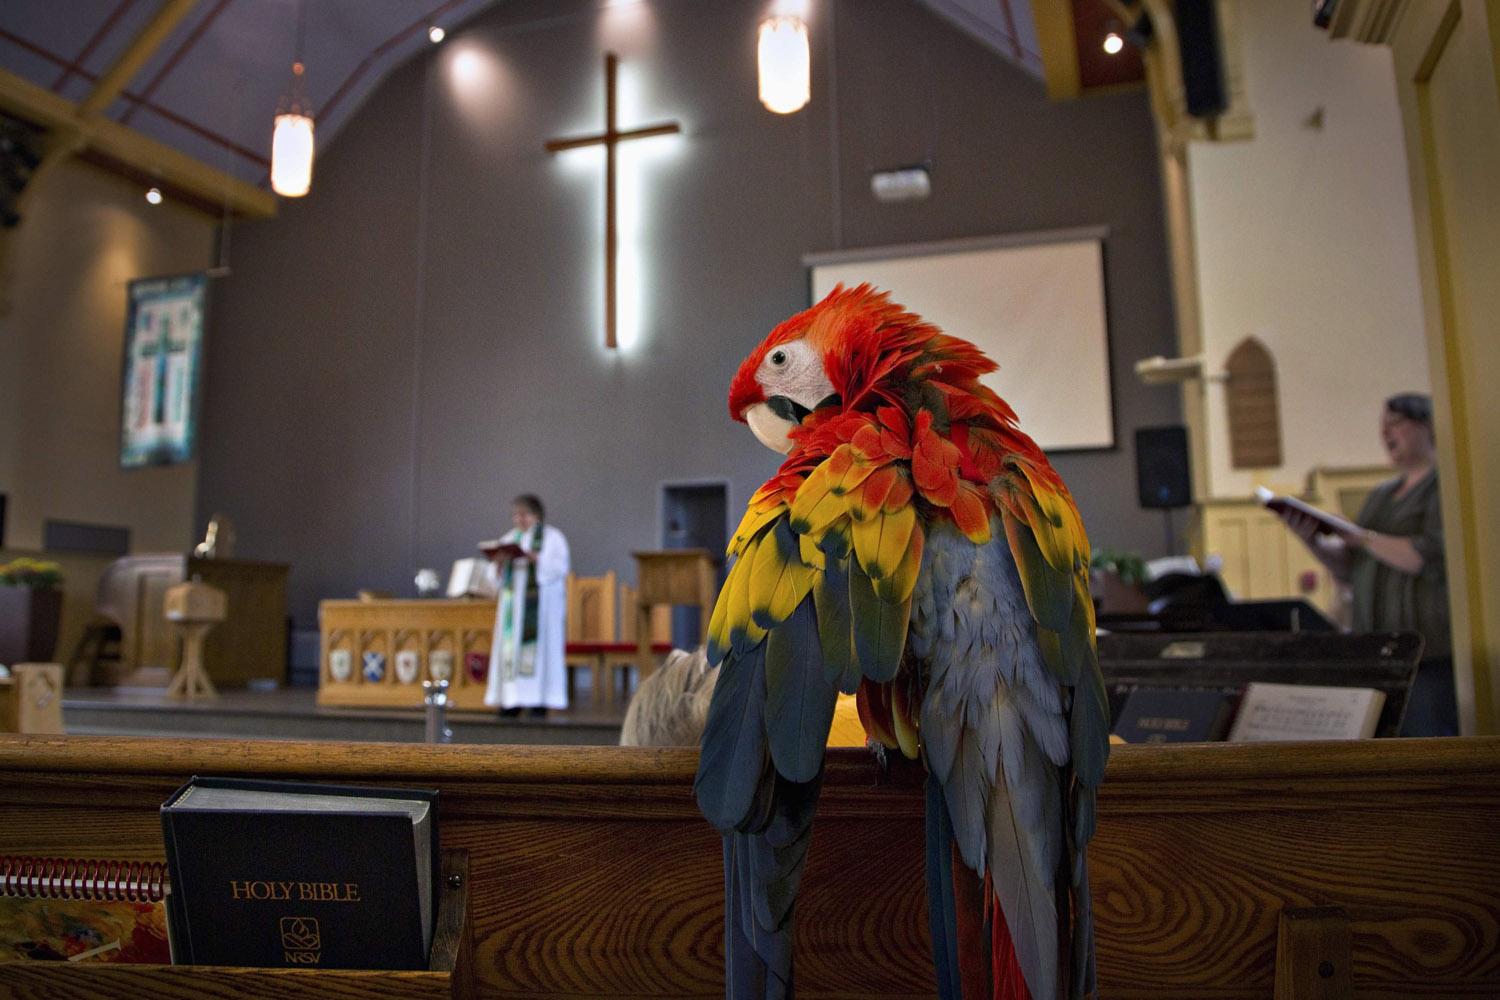 A Scarlet Macaw named Princess Tiffany is perched on a pew in St. Andrew's United Church in North Vancouver